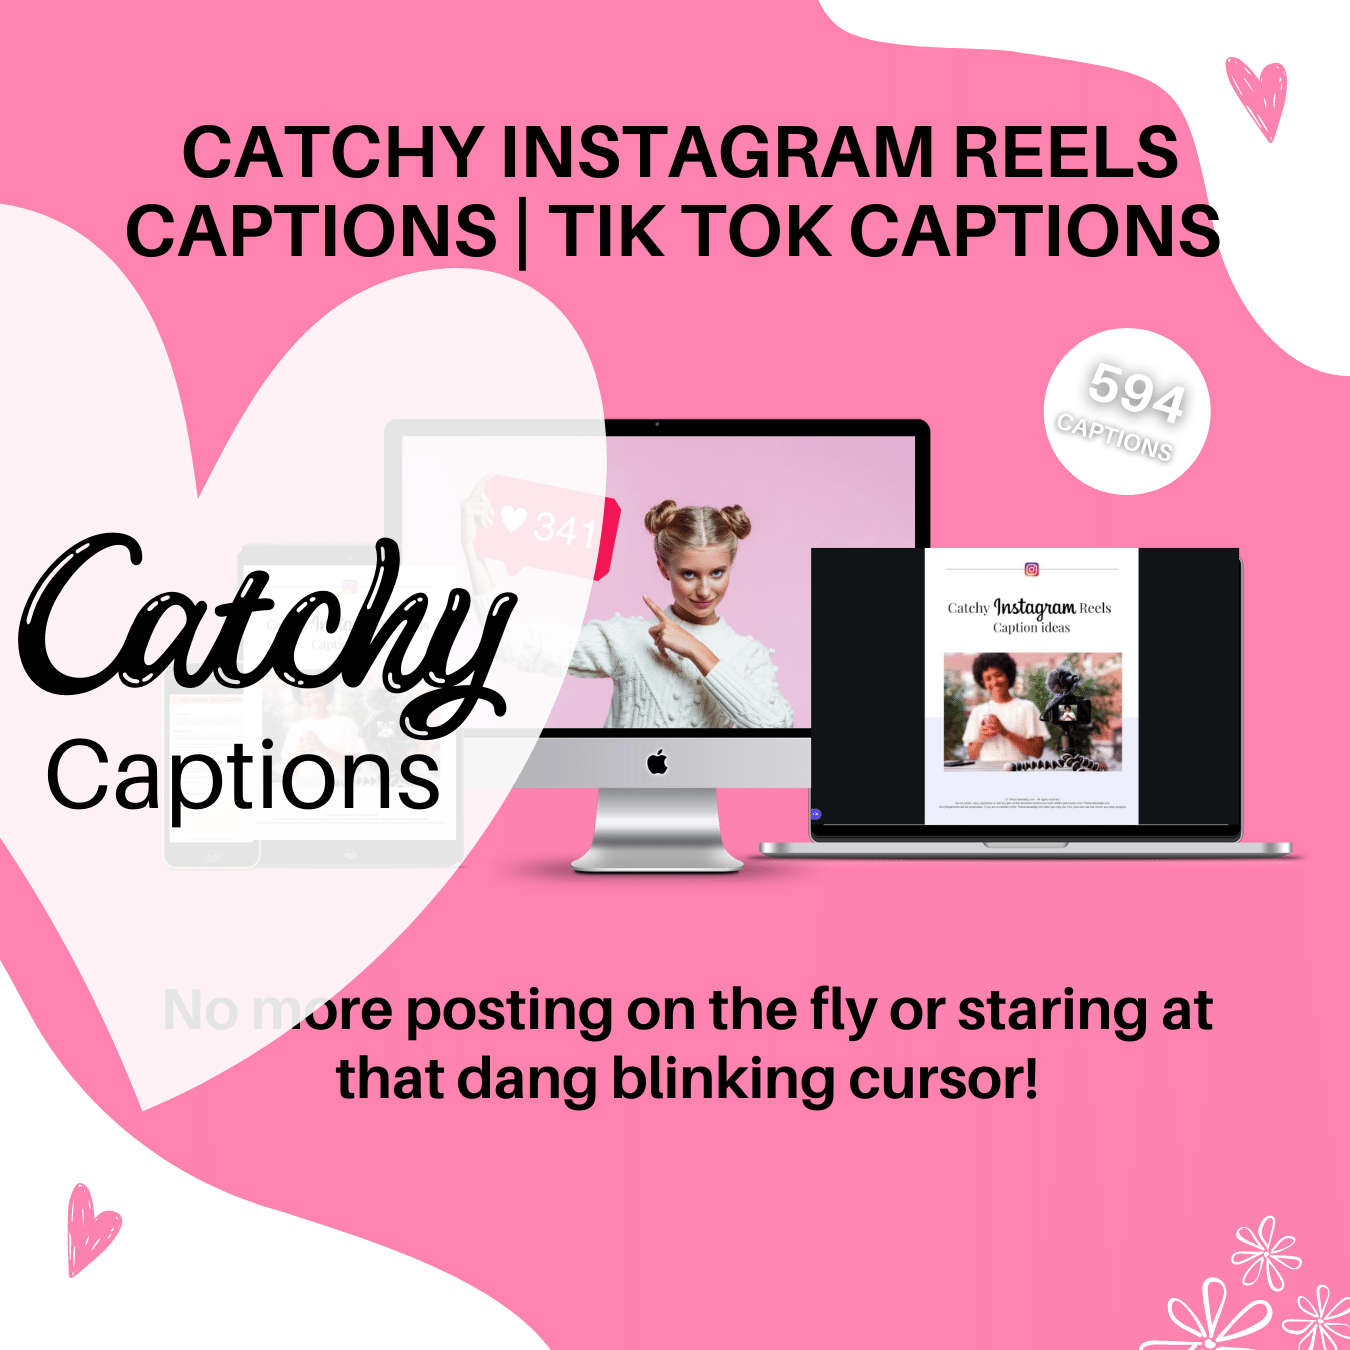 590+ Instagram Reels Caption Template for coaches